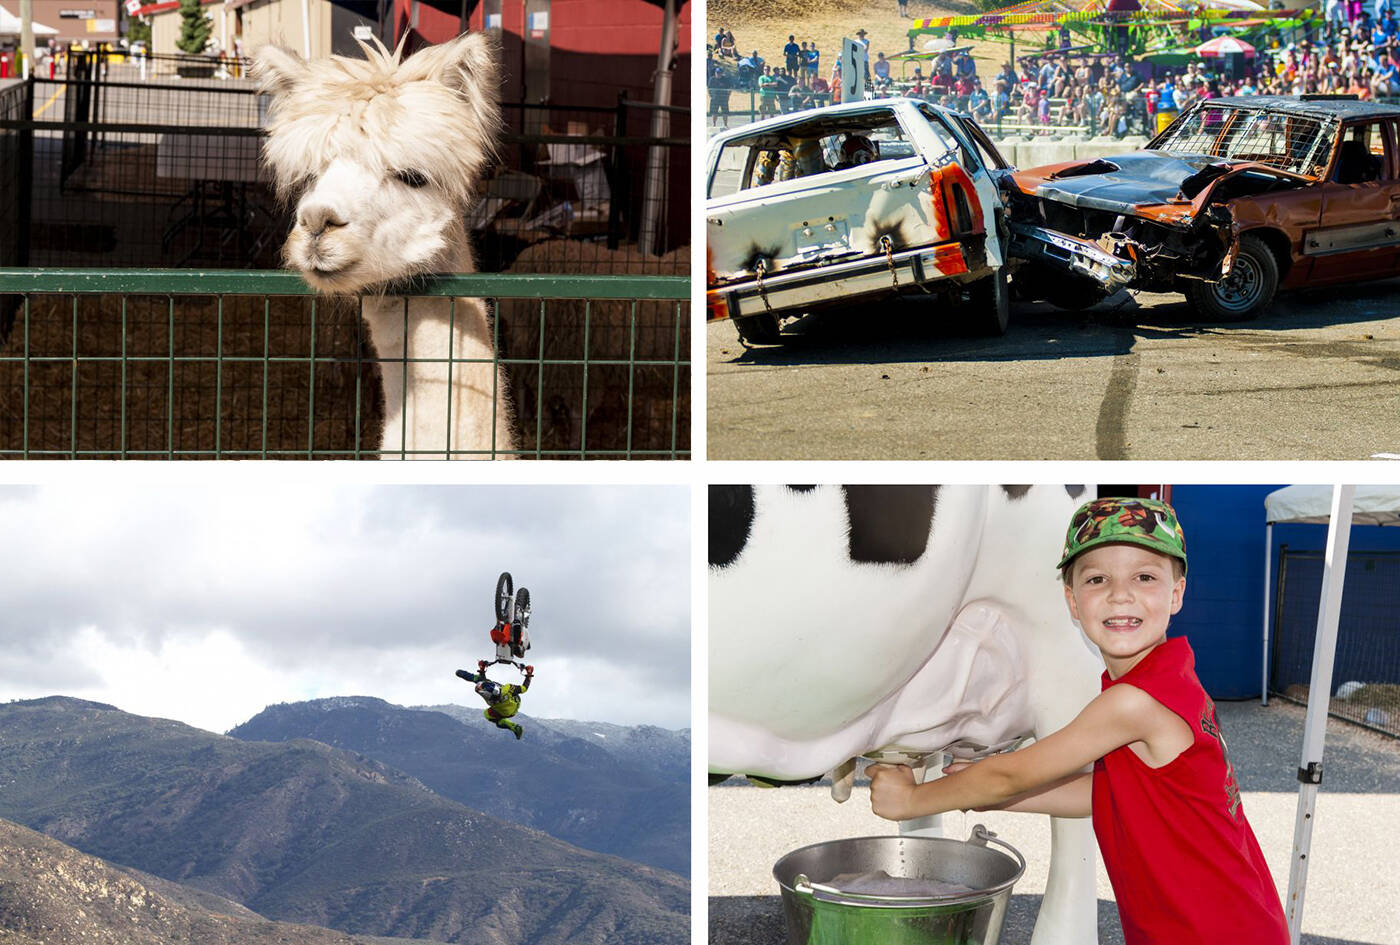 Expect the unexpected at the 2023 Abbotsford Agrifair! The Demolition Derby returns, along with daredevils and plenty of agriculture too.